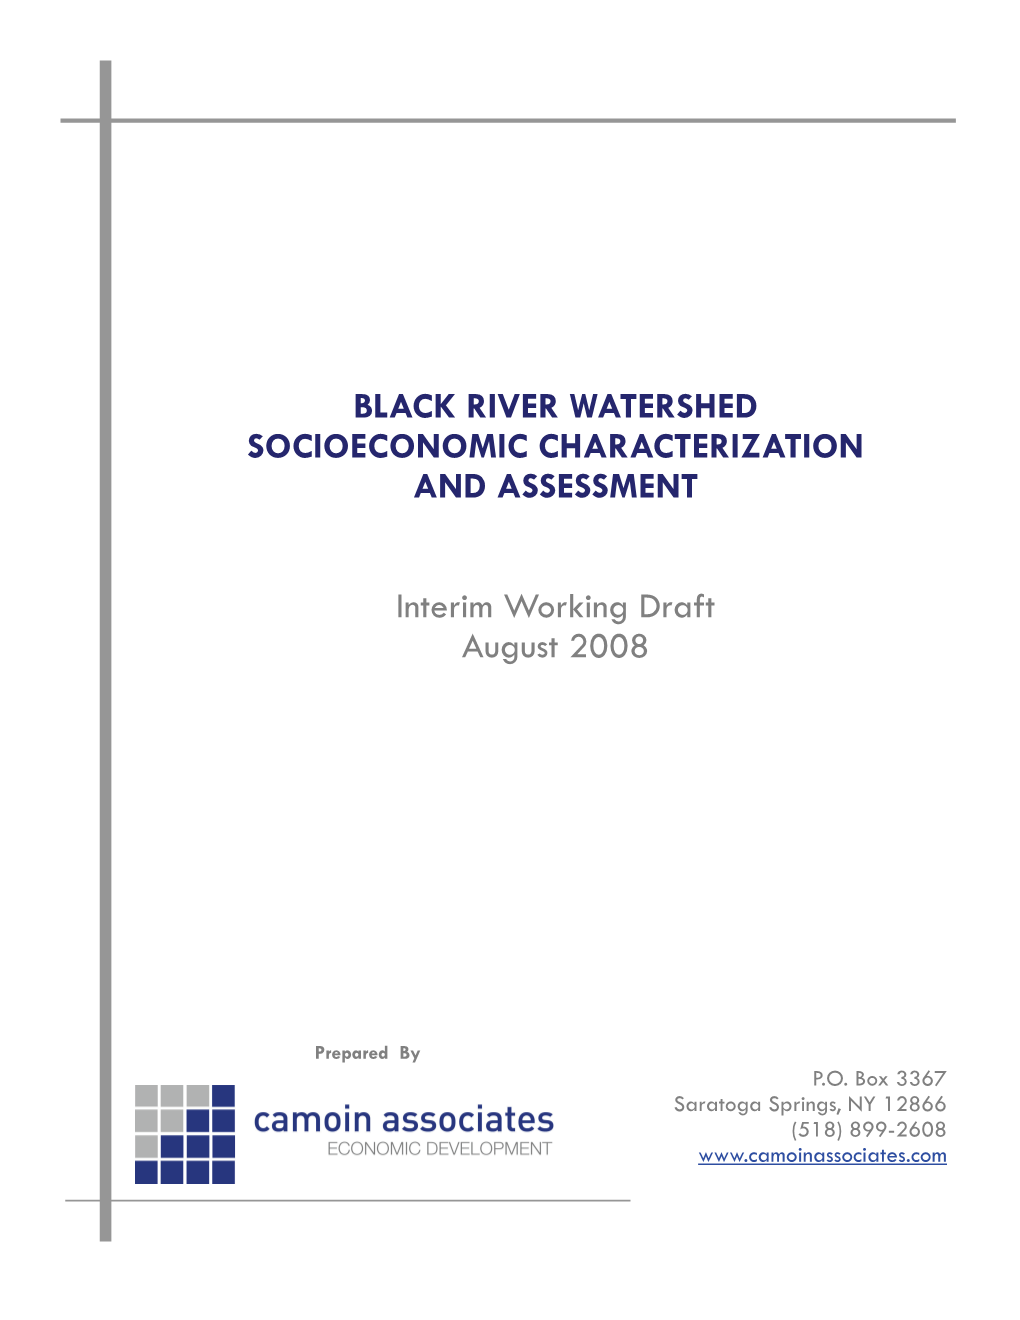 Black River Watershed Socioeconomic Characterization and Assessment